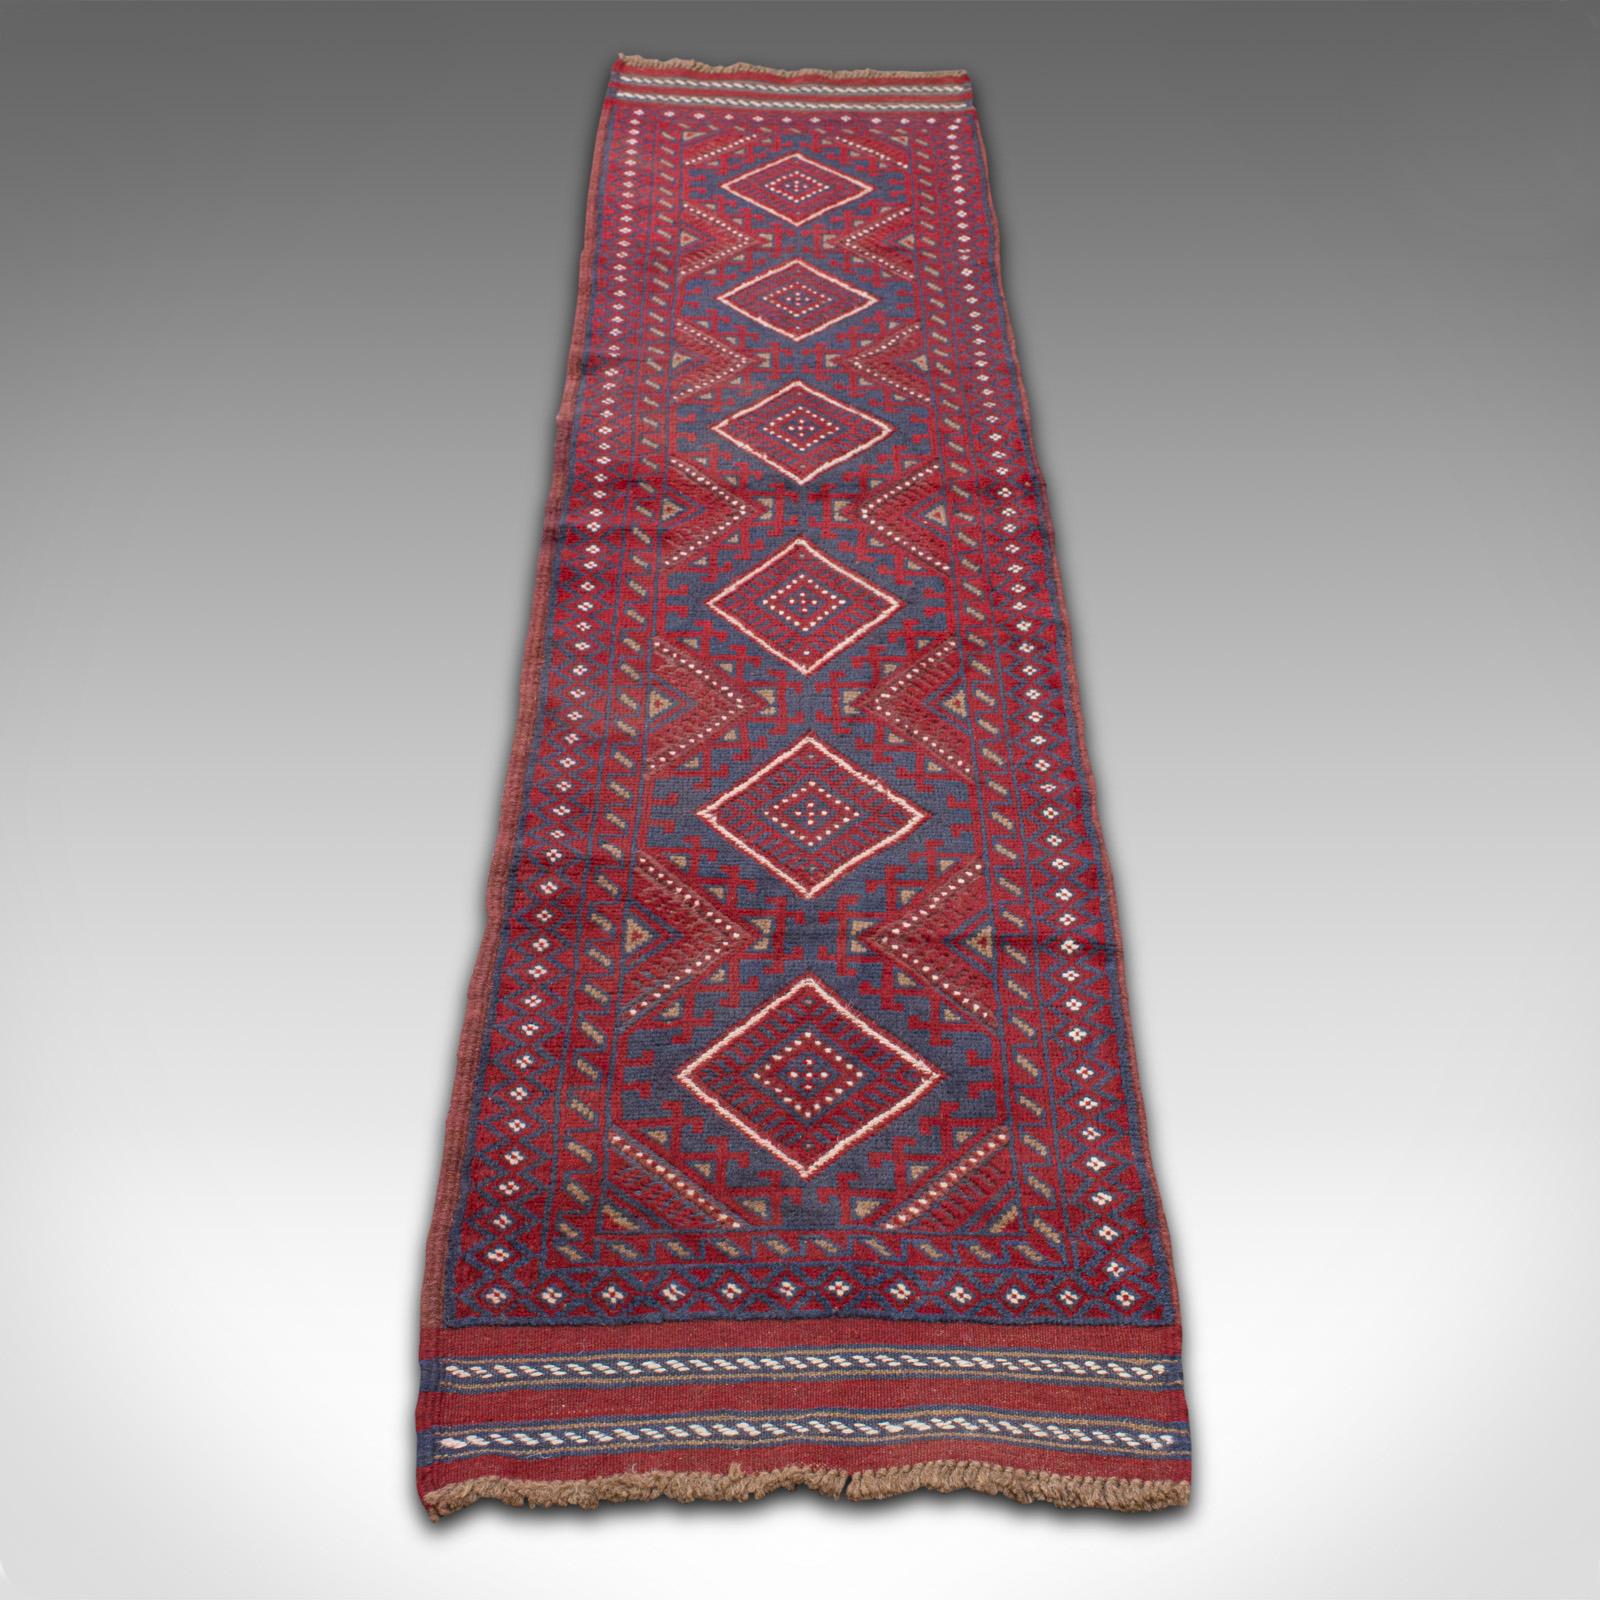 This is a long vintage Meshwani runner. A Caucasian, woven decorative rug or reception hall carpet, dating to the late 20th century.

Striking Kenareh runner size at 60cm x 280cm
Artisan hand-crafted using traditional skills with minimal wear or